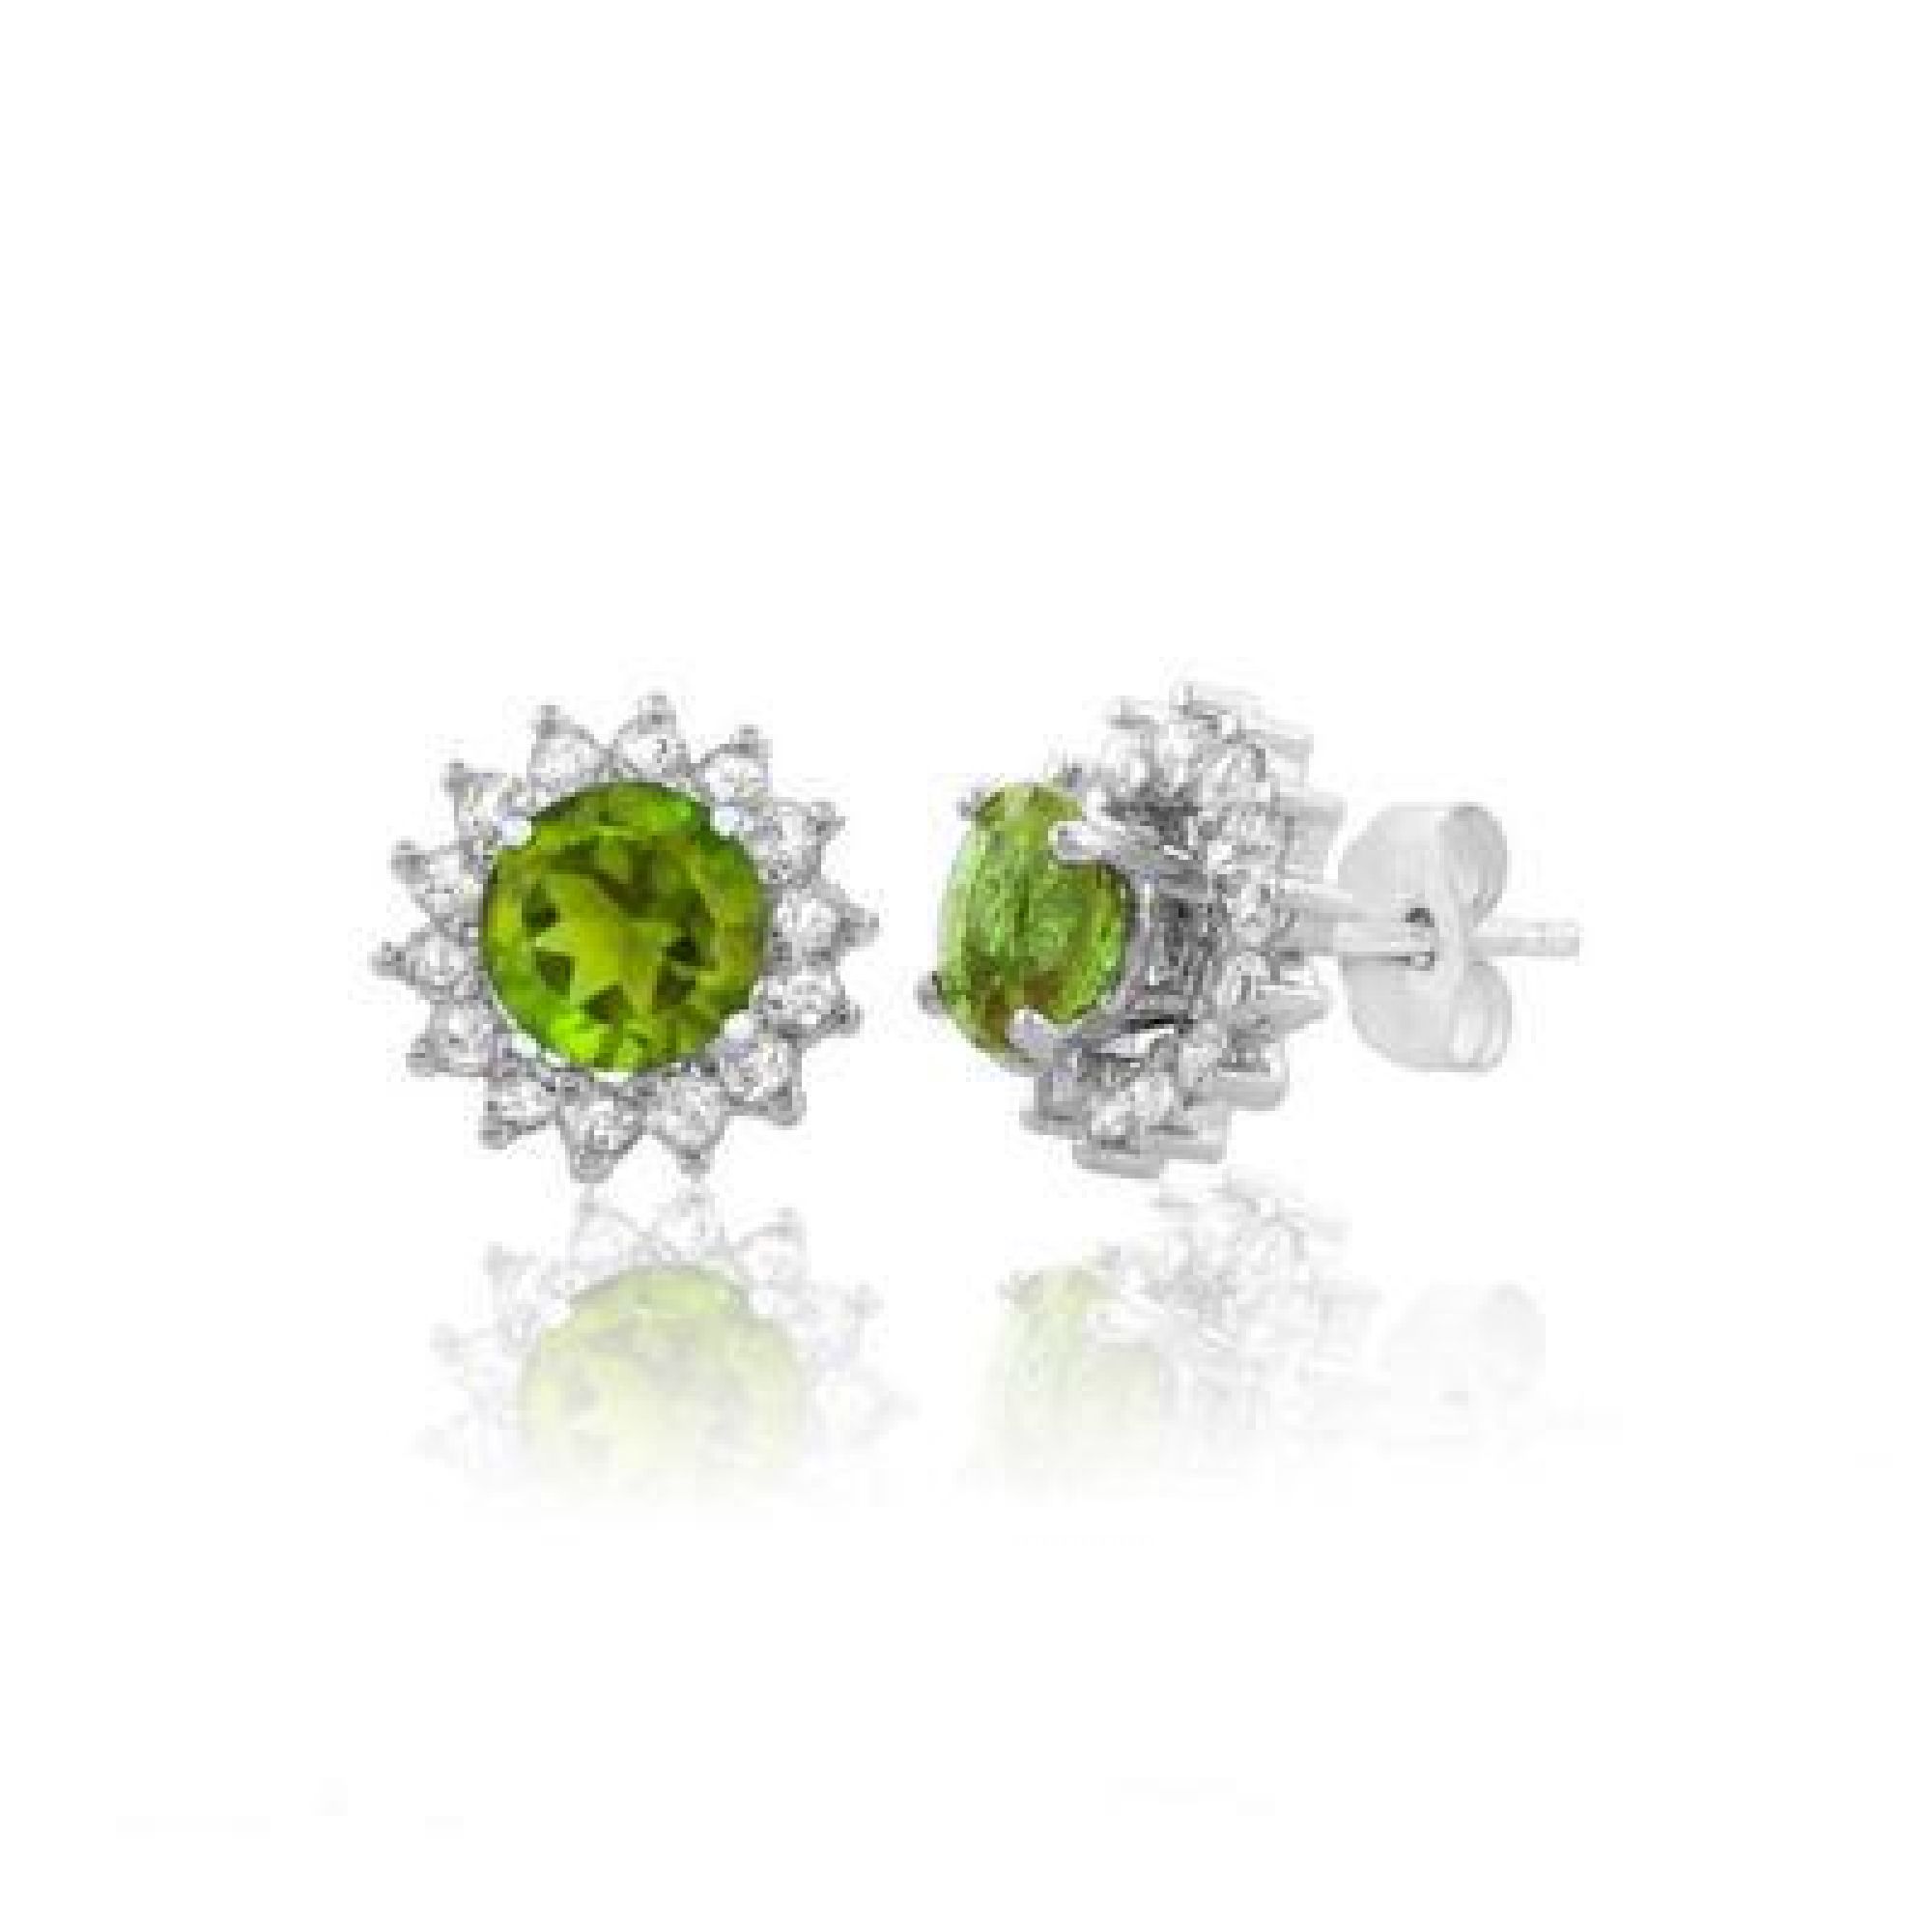 2 Carat Genuine Peridot and White Sapphire Stud Earrings in Sterling Silver